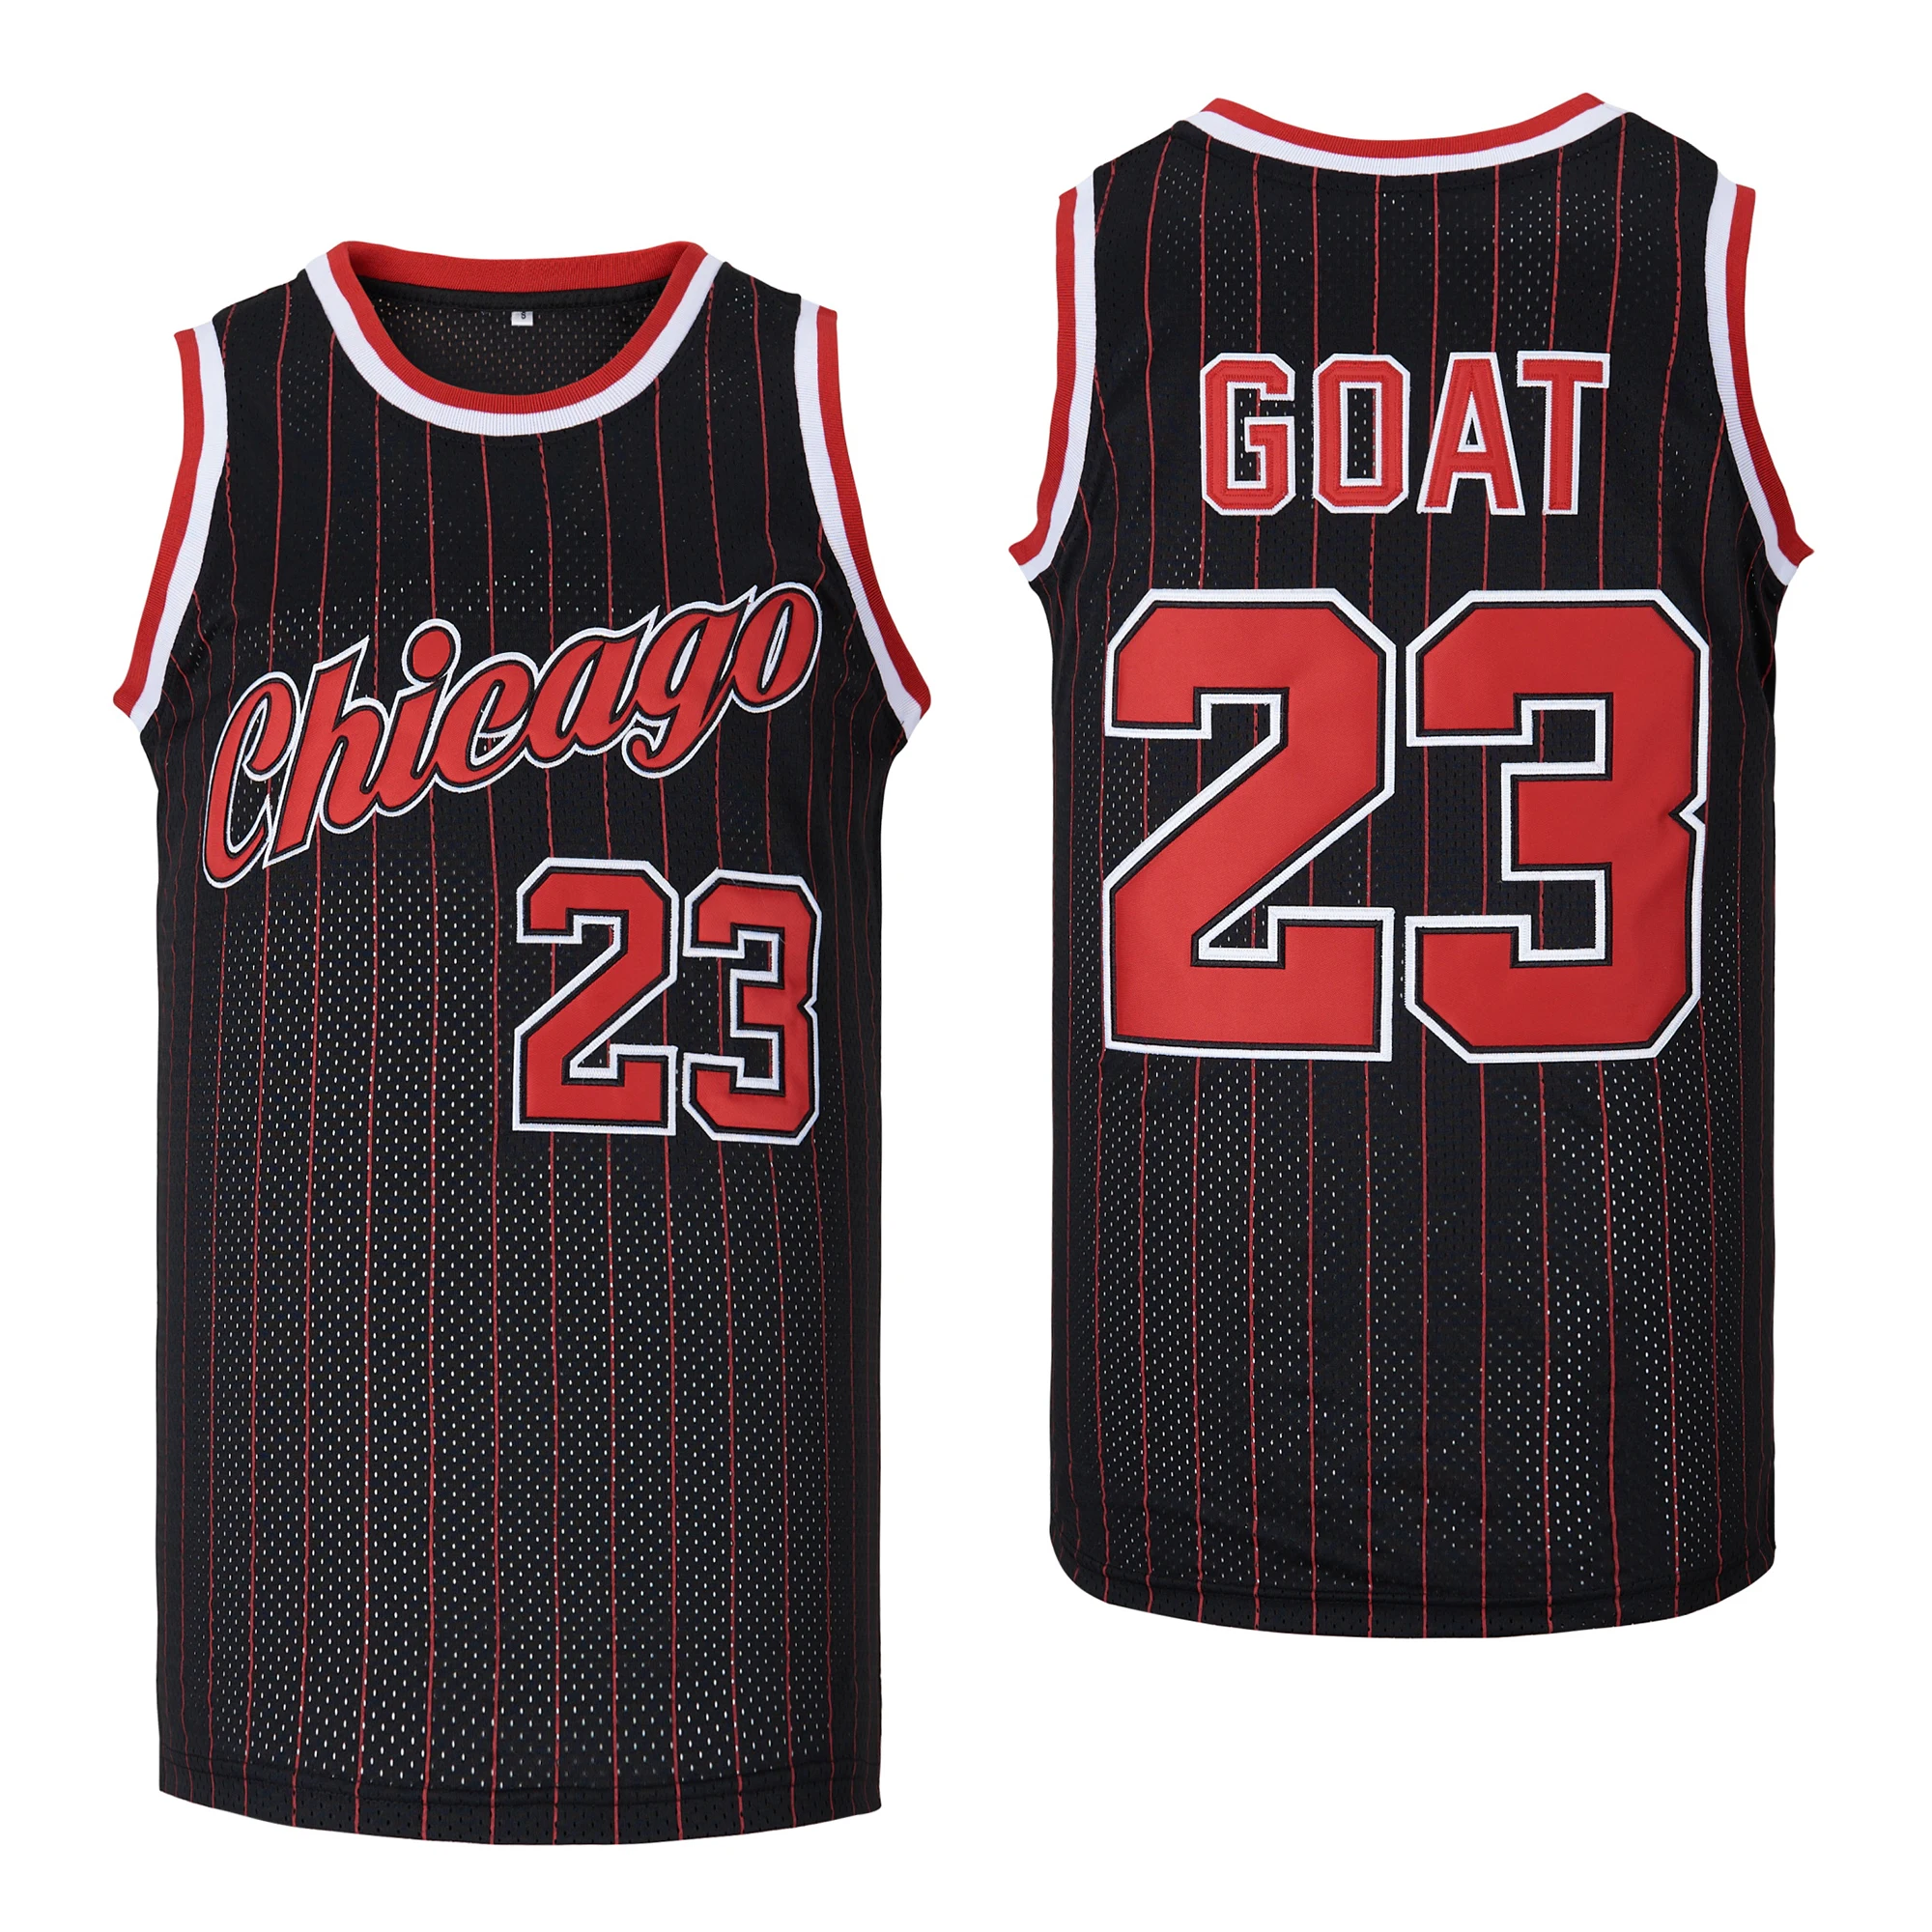 

Basketball jerseys Chicago 23 Goat jersey High quality Sewing Embroidery Outdoor sportswear Hip Hop Movie Black red stripes